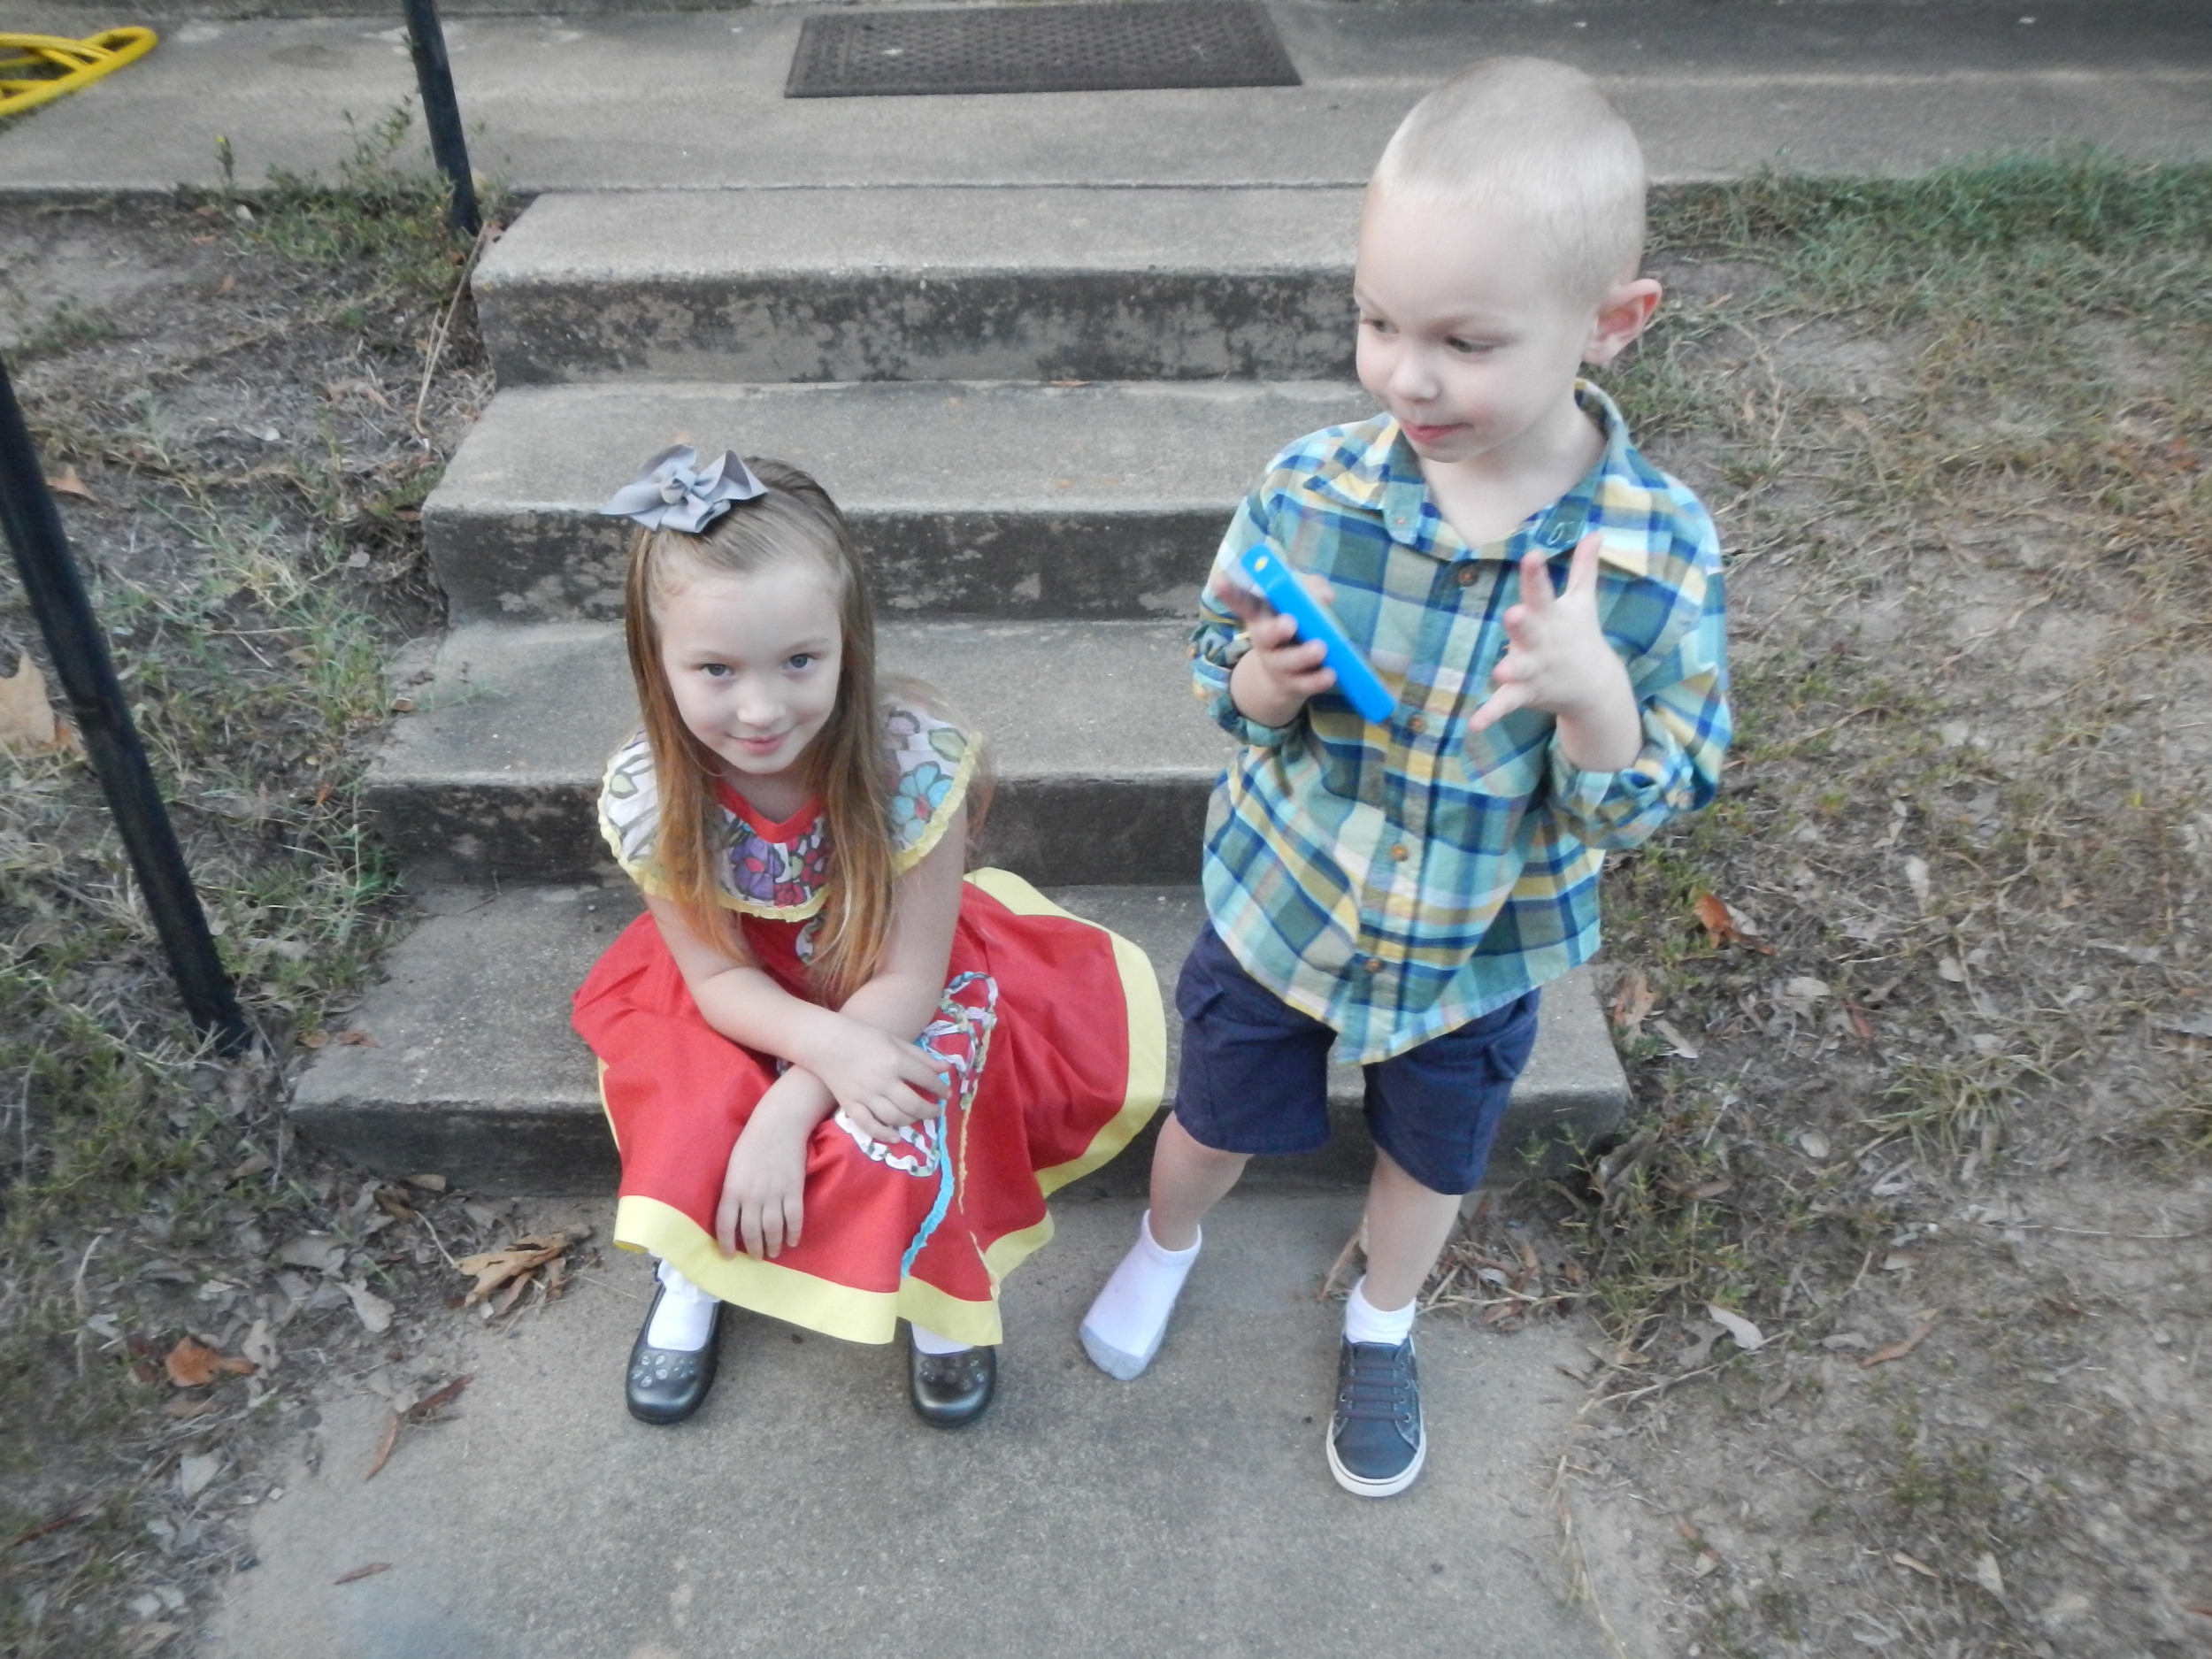  Oh dear, Ezra has already lost a shoe! &nbsp;Now Grace is giving me the Mom-has-taken-a-bazillion-pictures-already look.  